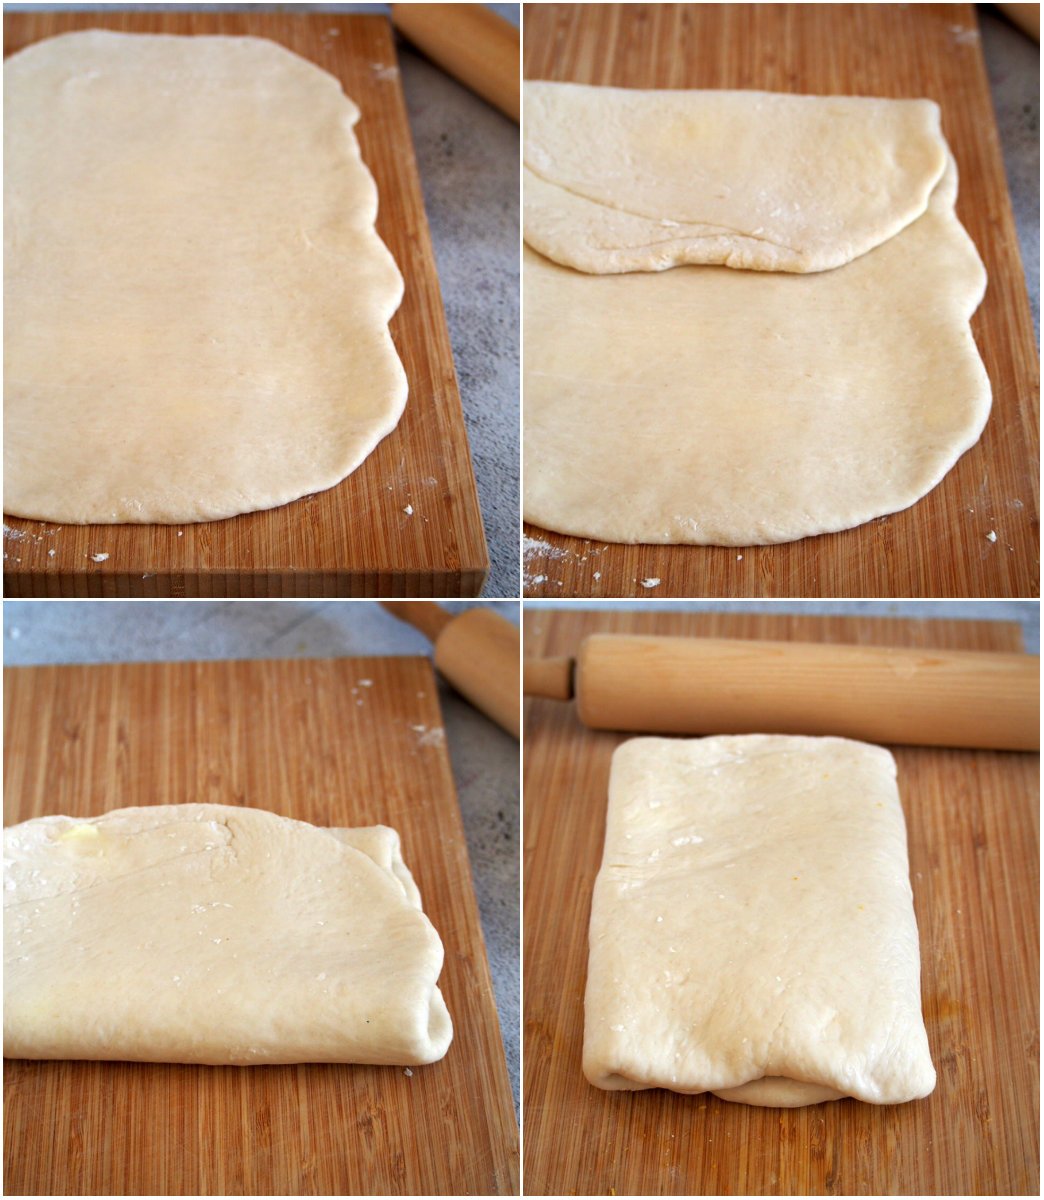 Second folding process for the breakfast buns.